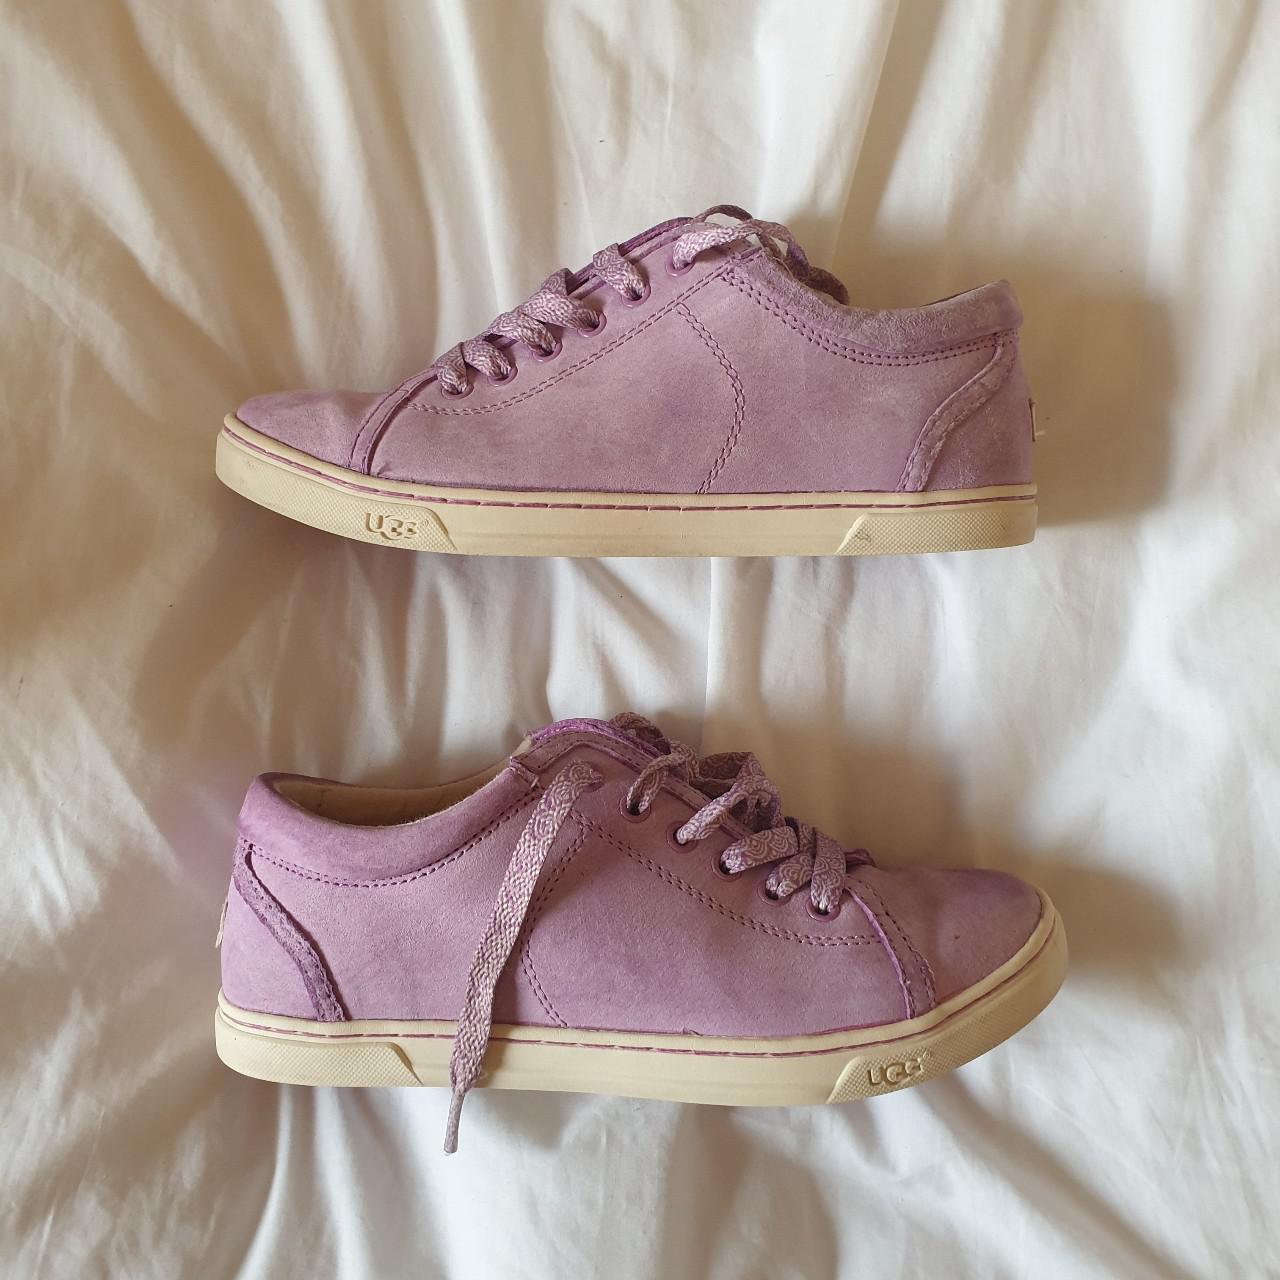 Product Image 2 - UGG TOMI suede sneakers 1008492
Perfect